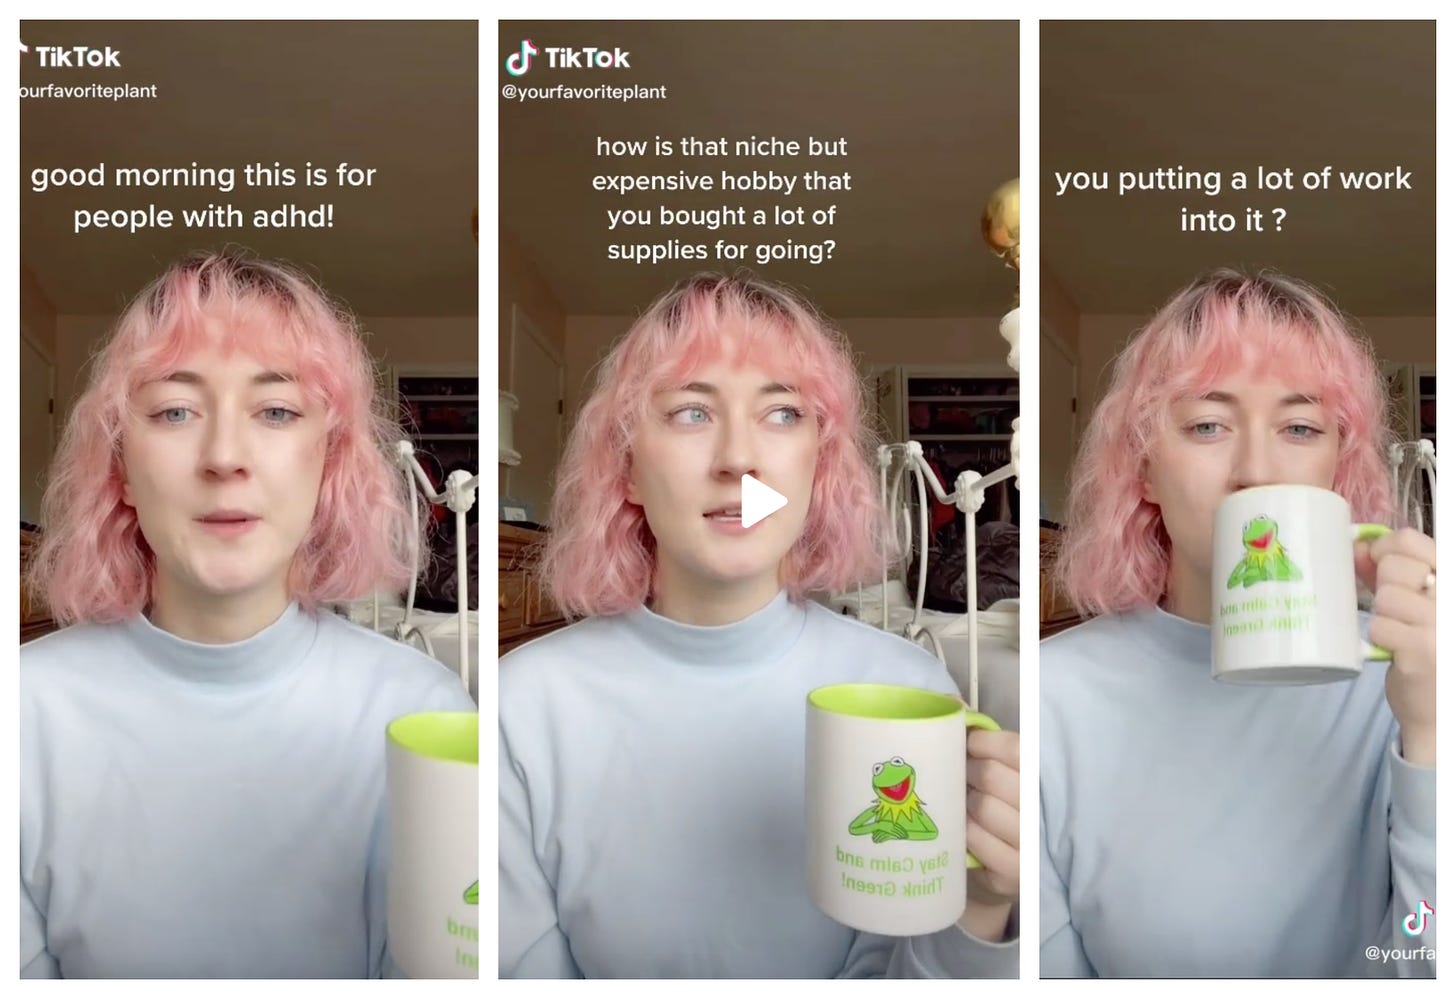 Young woman with pink hair in three photo panels. Text: Good morning this is for people with adhd! How is that niche but expensive hobby that you bought a lot of supplies for going? Putting a lot of work into it?